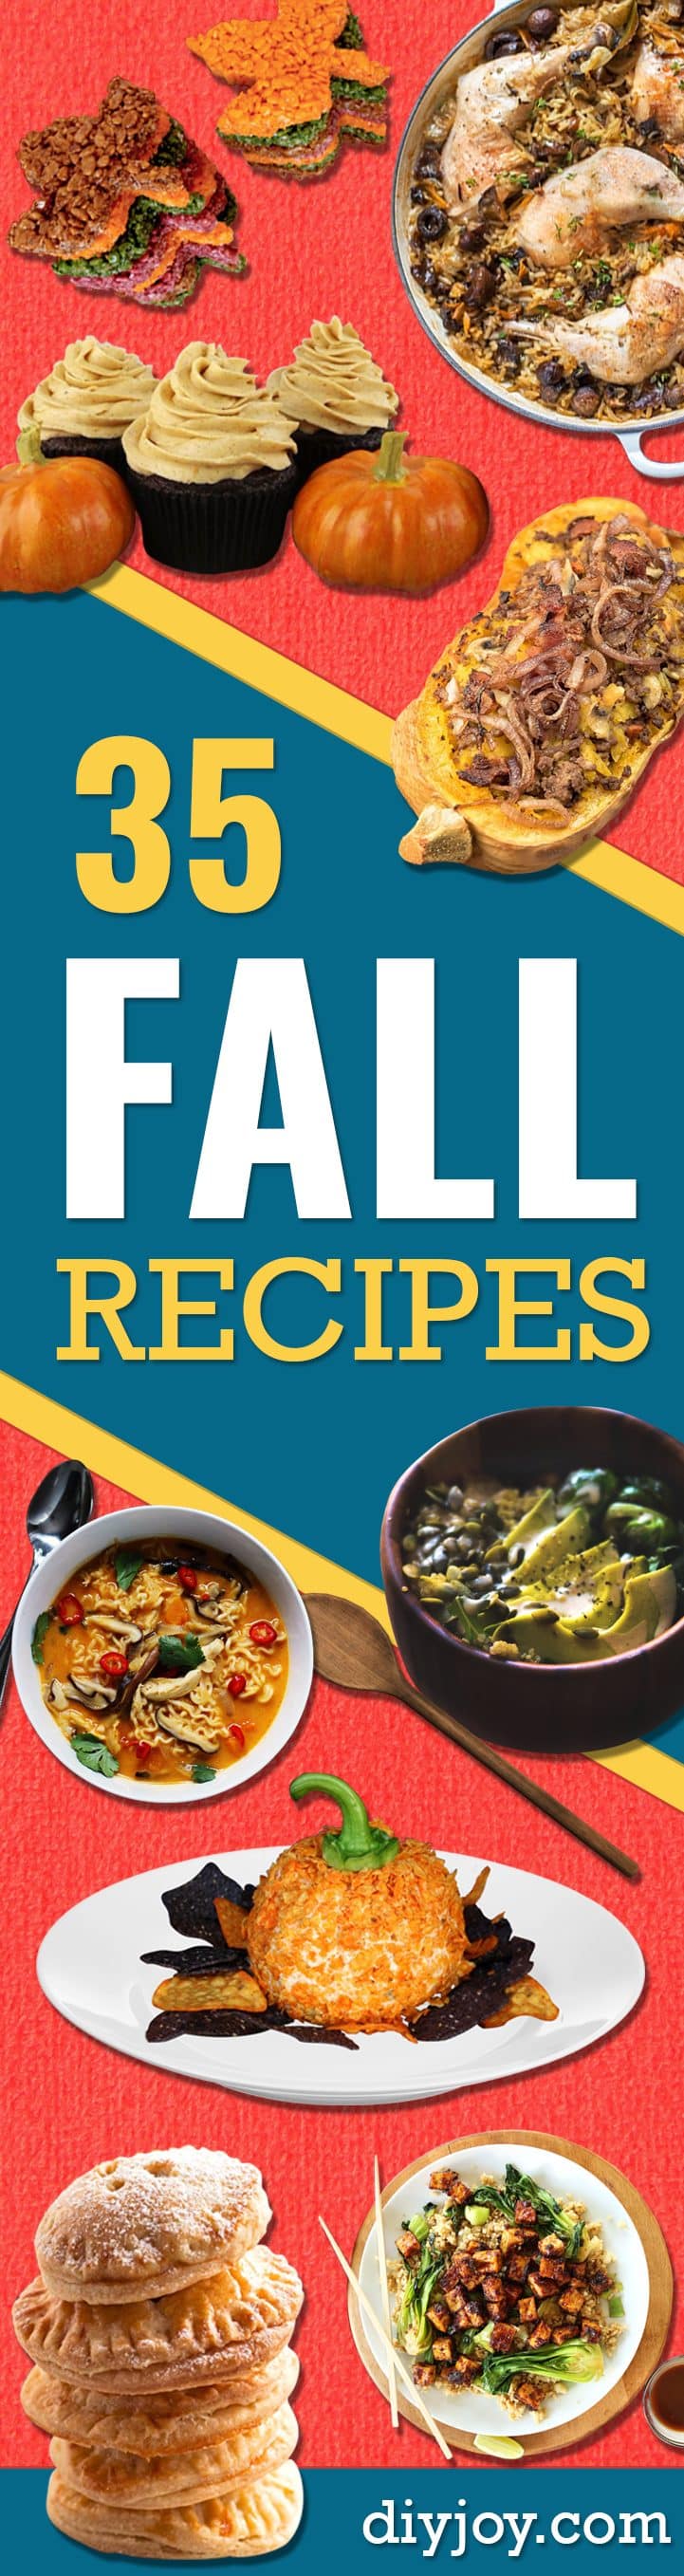 35 Fall Recipes - Best Quick And Easy Fall Recipe Ideas and Healthy Dishes You Can Make For Dinner, Soup, Appetizers, Crockpot and Slow Cooker Snacks and Drinks, Even Dessert